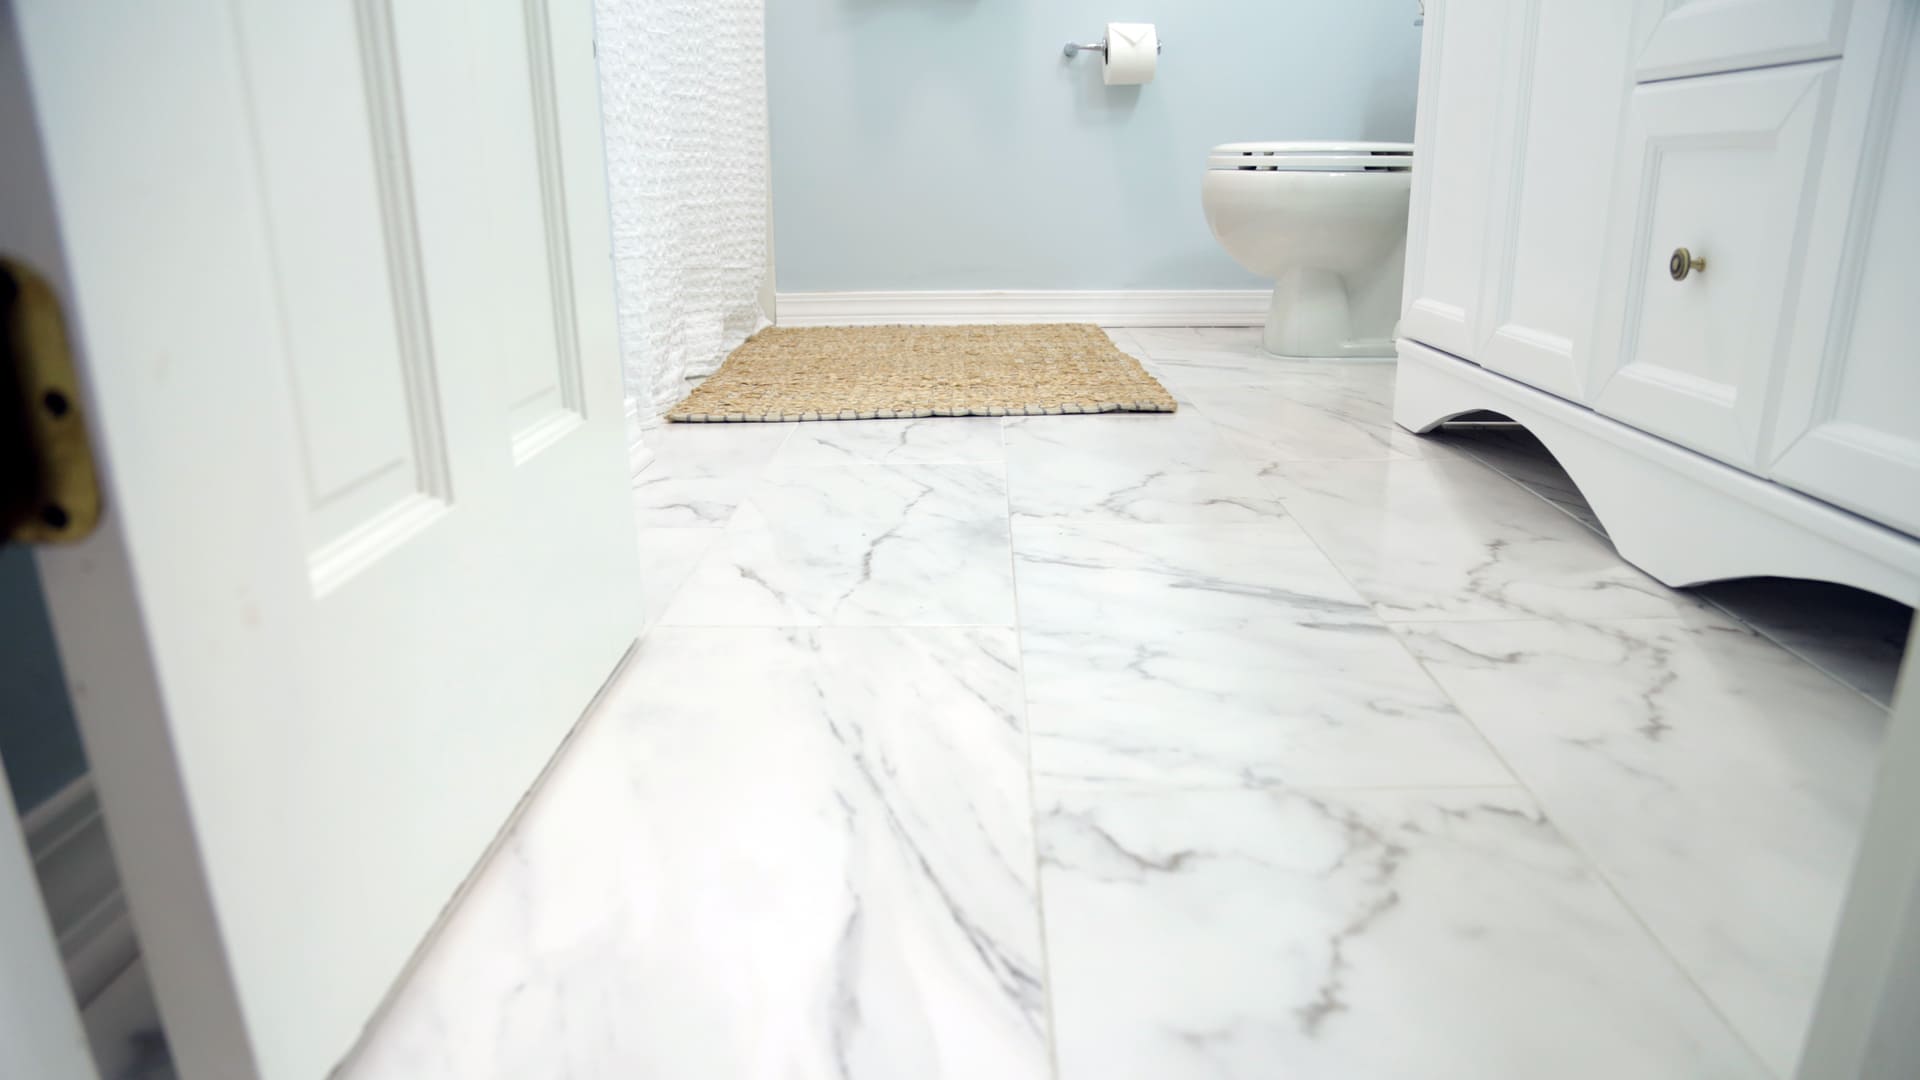 How To Lay Ceramic Tile On A Floor, How To Install Ceramic Floor Tile